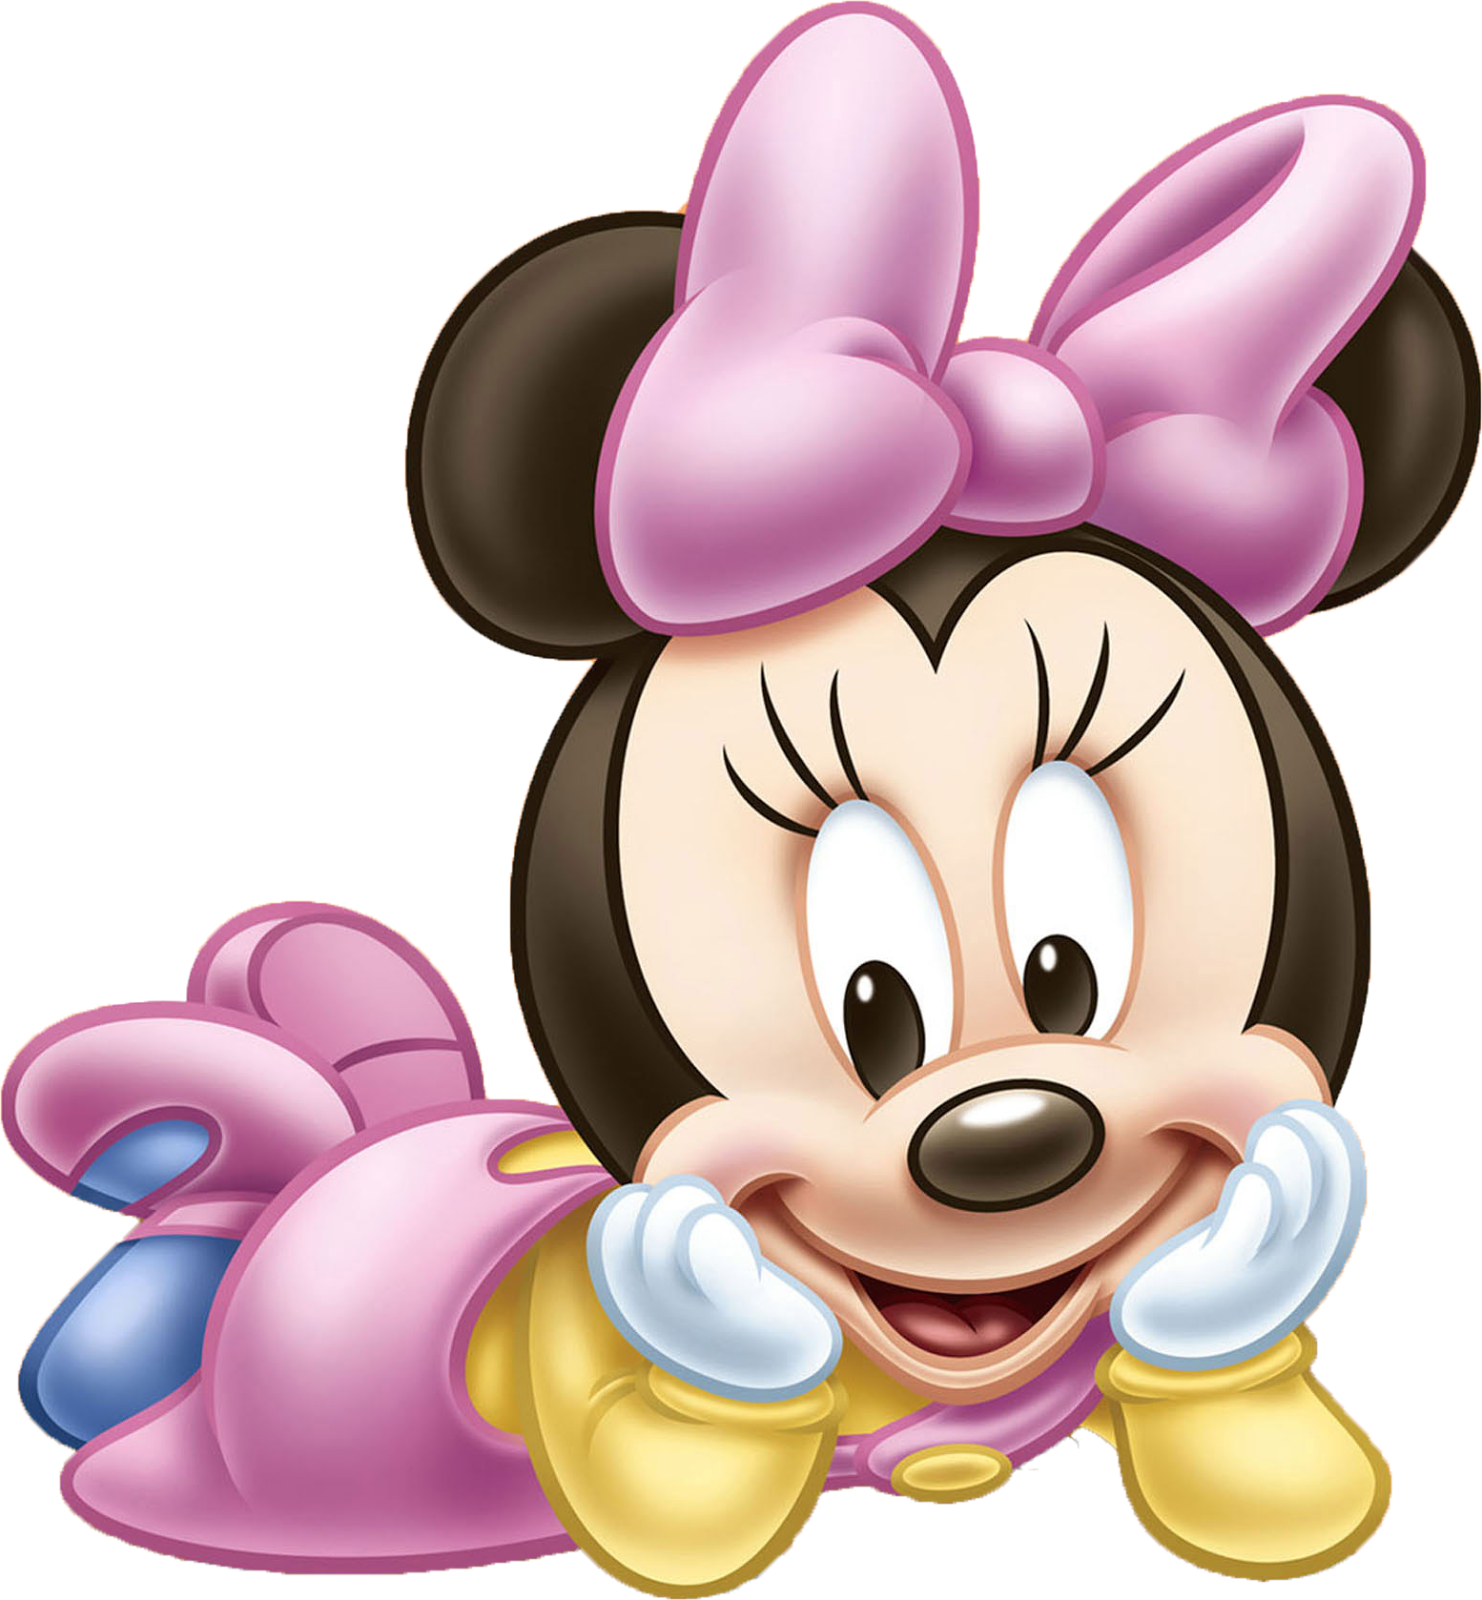 Lovely Minnie Baby, Free Printable Image.